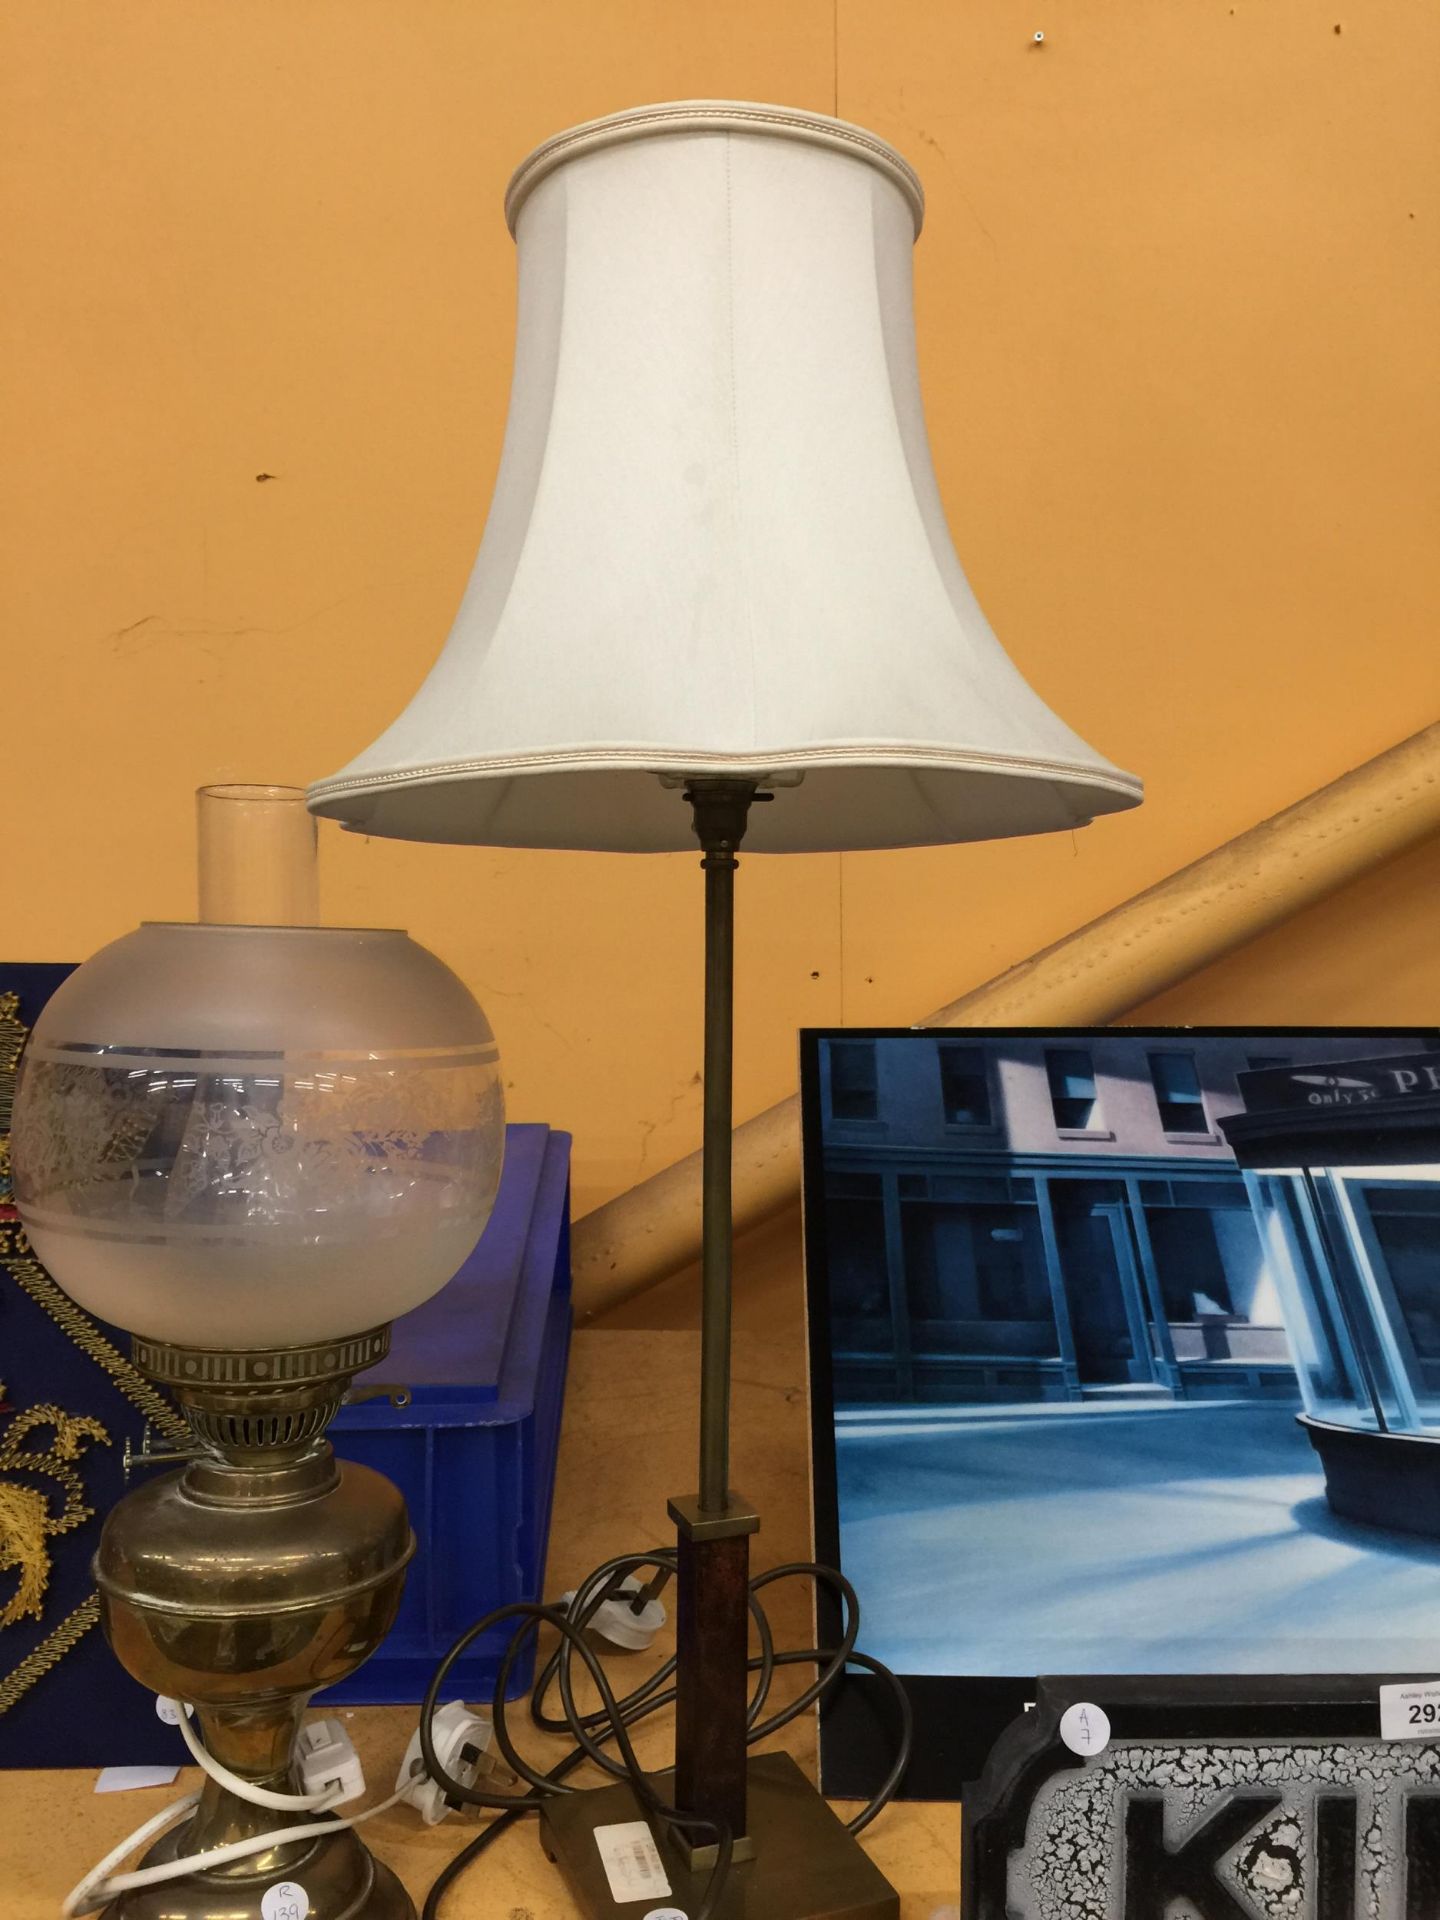 TWO LAMPS TO INCLUDE A BRASS OIL LAMP WITH GLASS FUNNEL AND SHADE AND A FRUTHER MODERN LAMP - Image 3 of 3